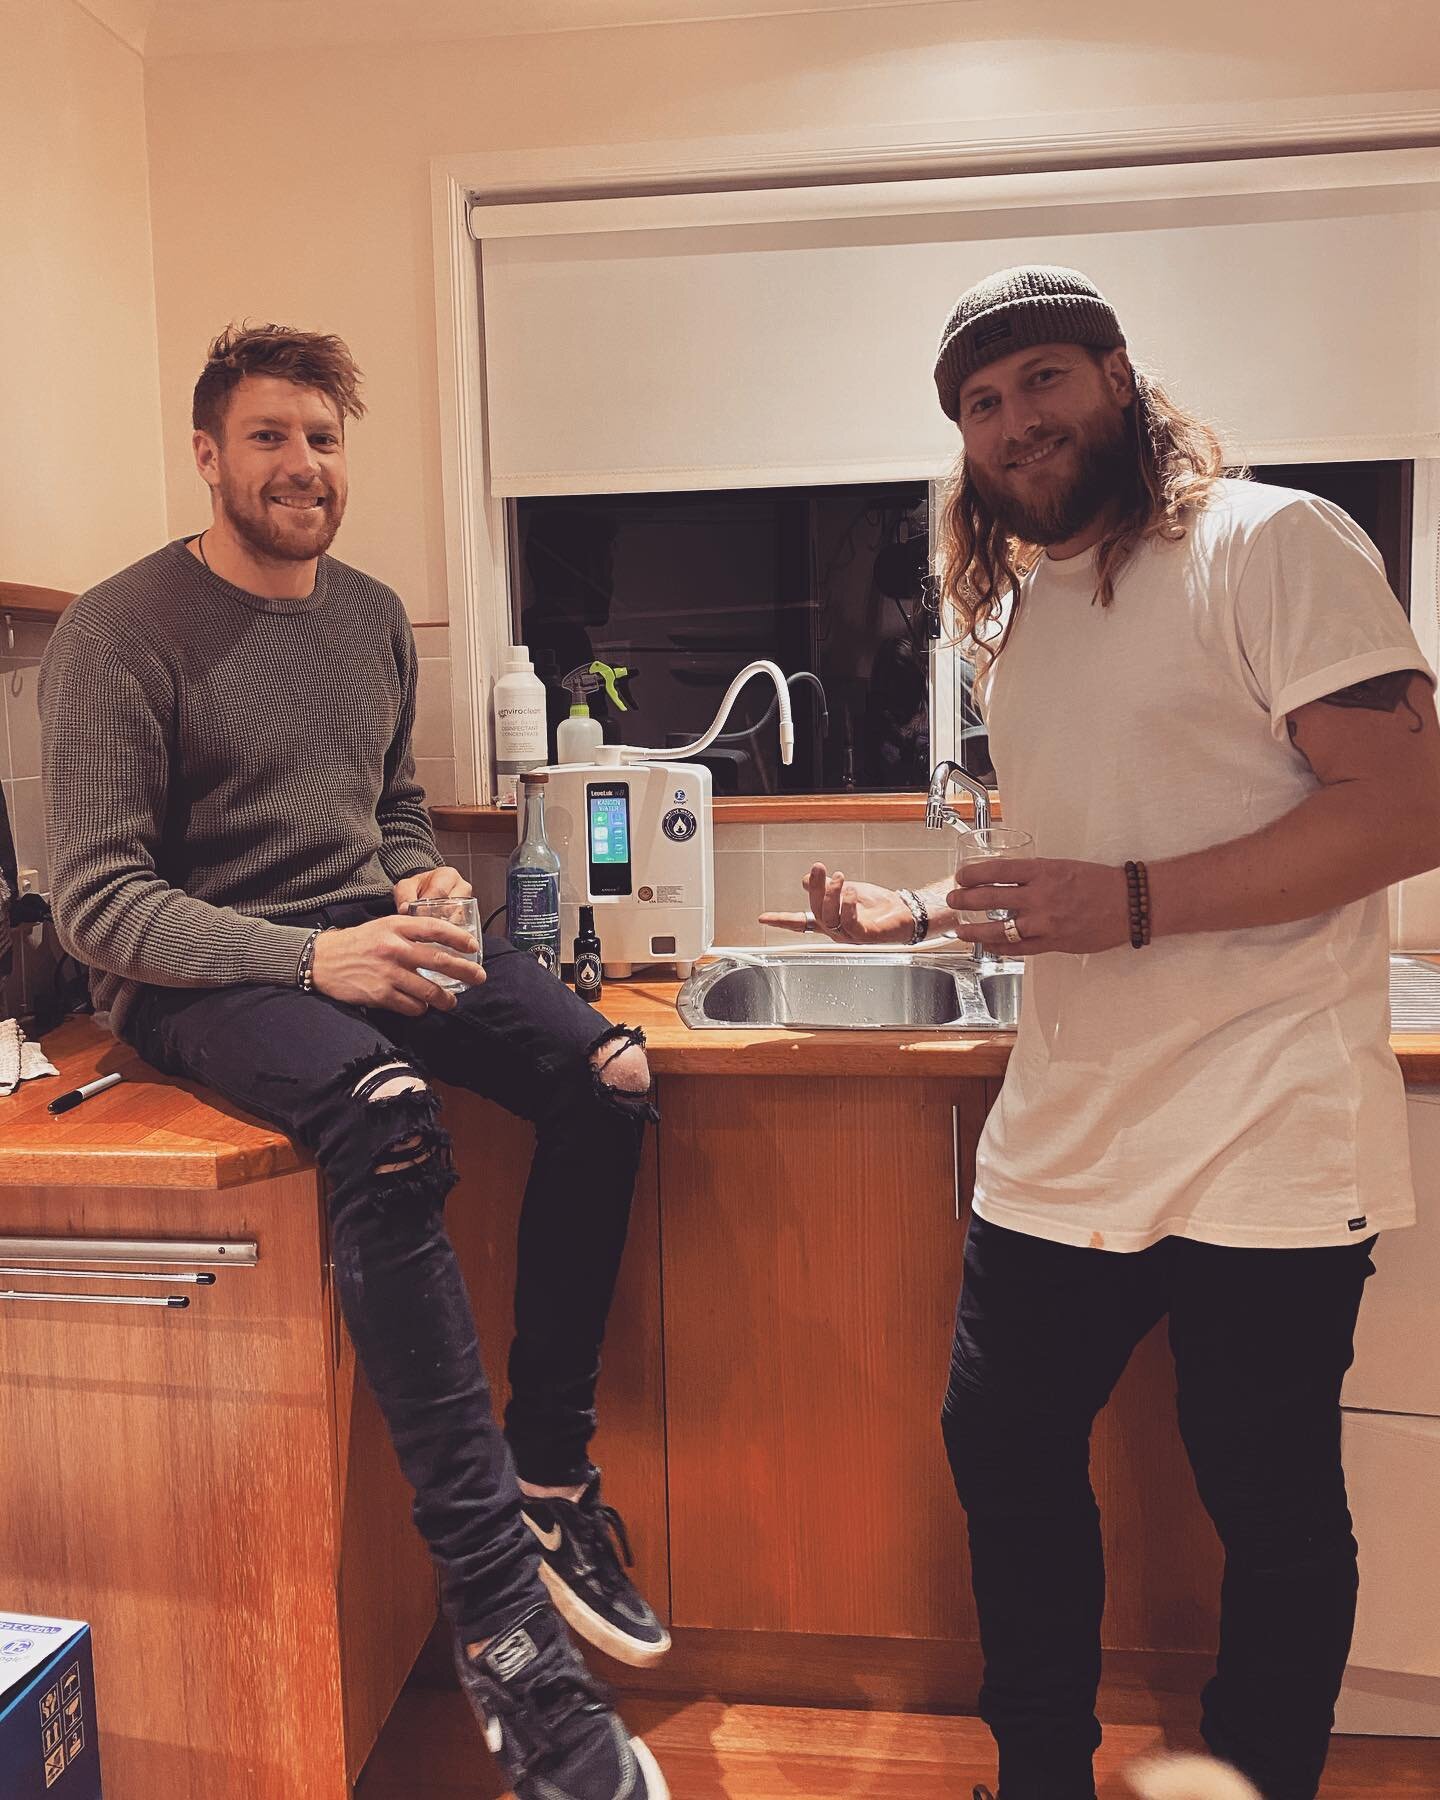 SET.4.LIFE!
💦
We just set up Jamie&rsquo;s new Kangen system, now he has THE BEST freshly ionised water on tap FOR LIFE 😄
💧
These revolutionary water systems are shipped from Japan where they&rsquo;re hand-made with the highest quality control 🙌?